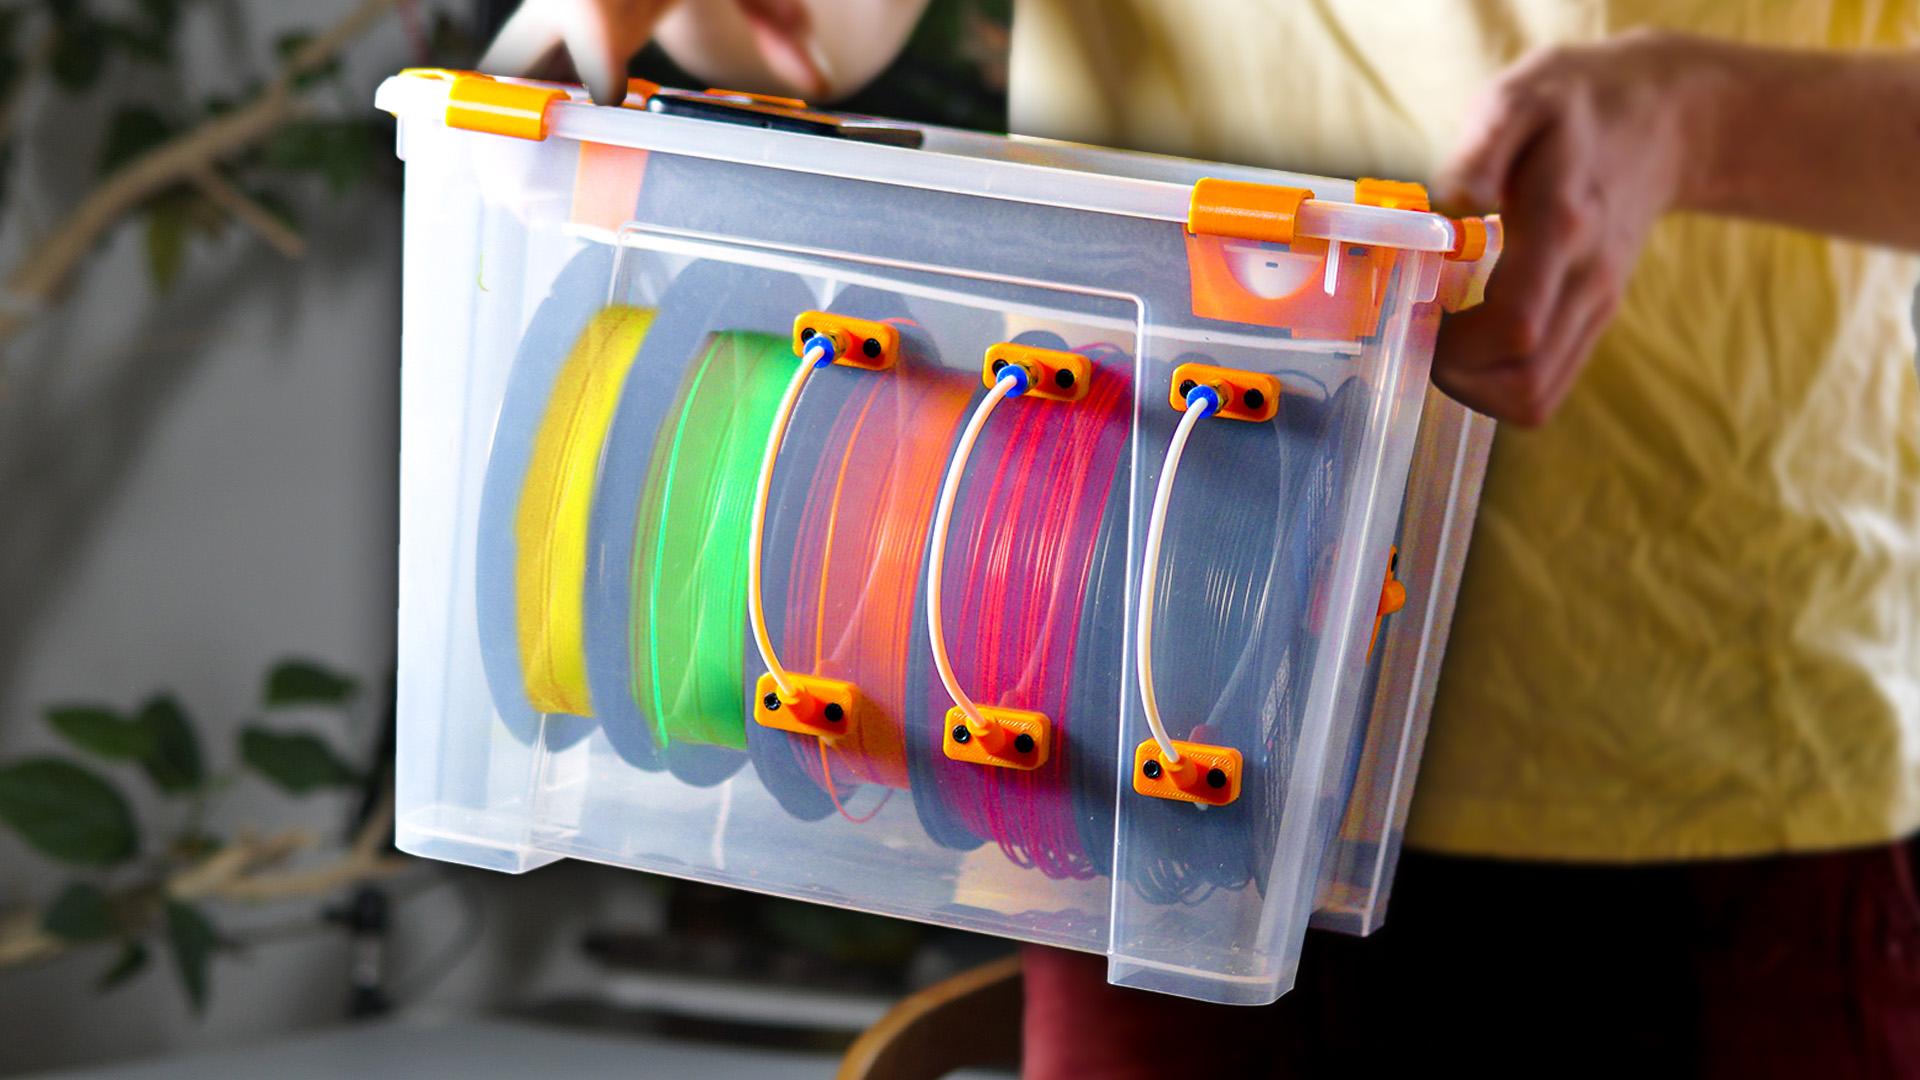 Diy Filament Dry Box How To Build One